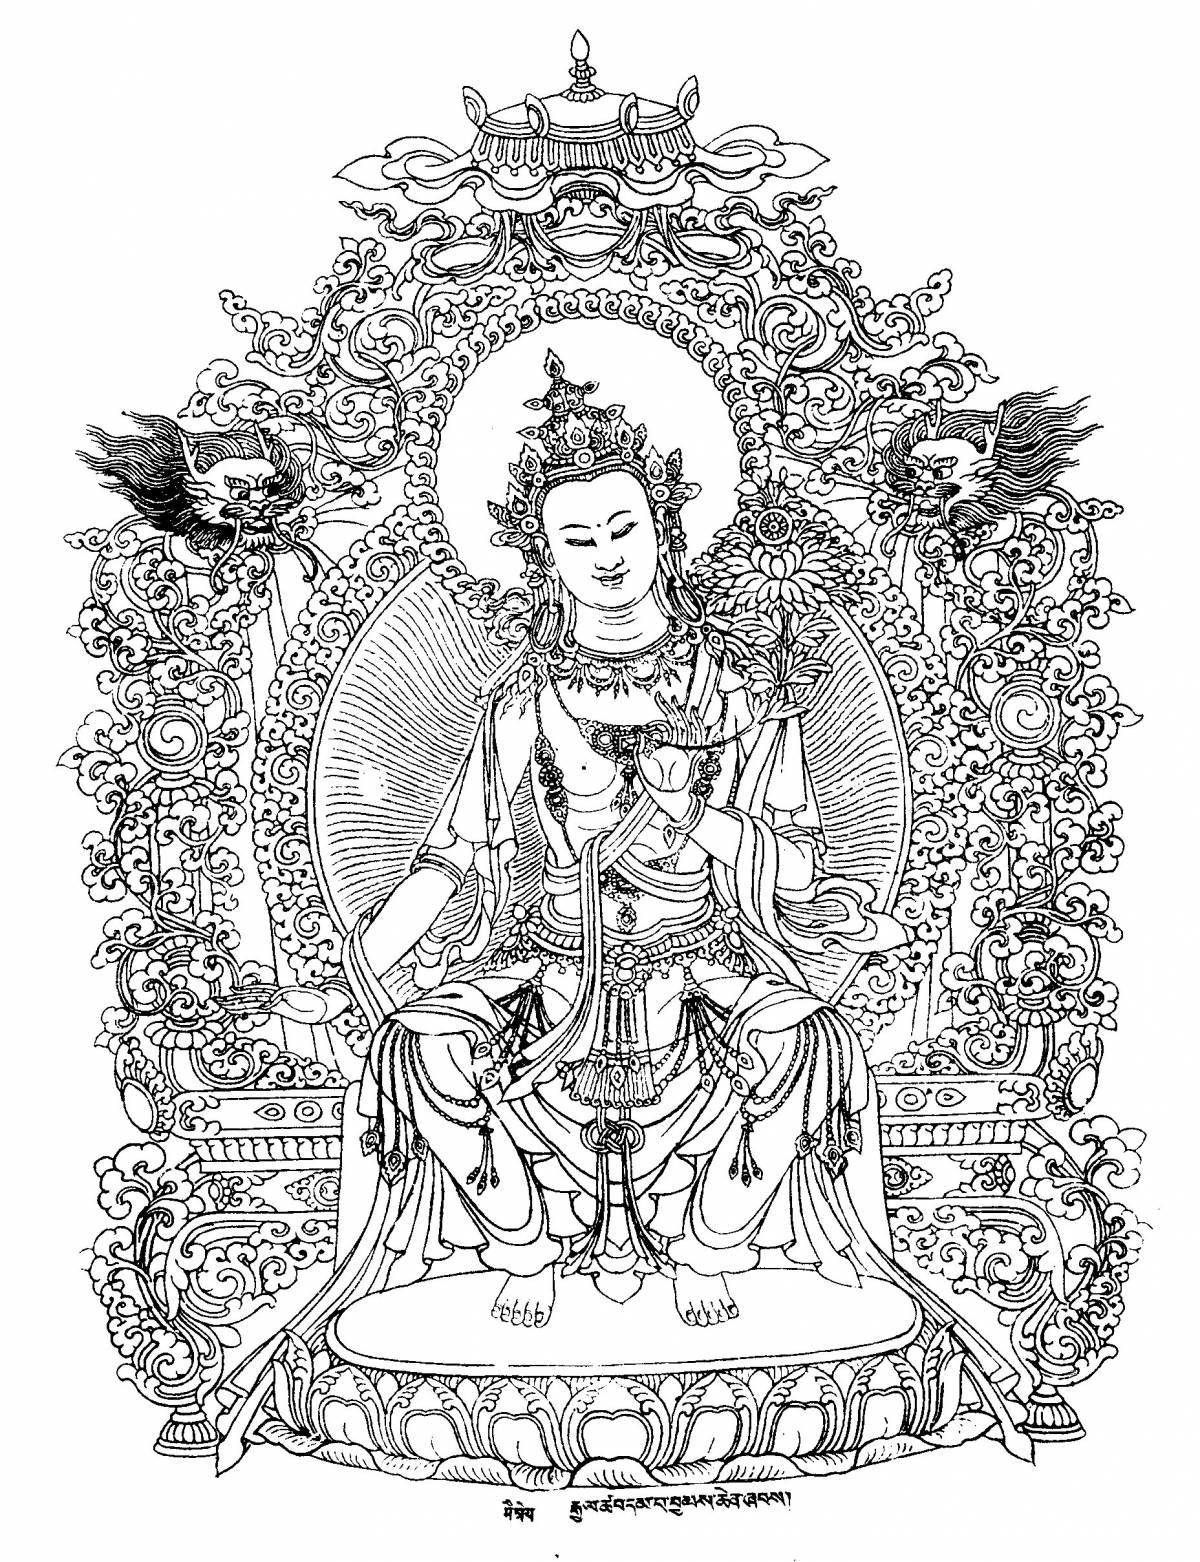 Inspirational Buddhism coloring page